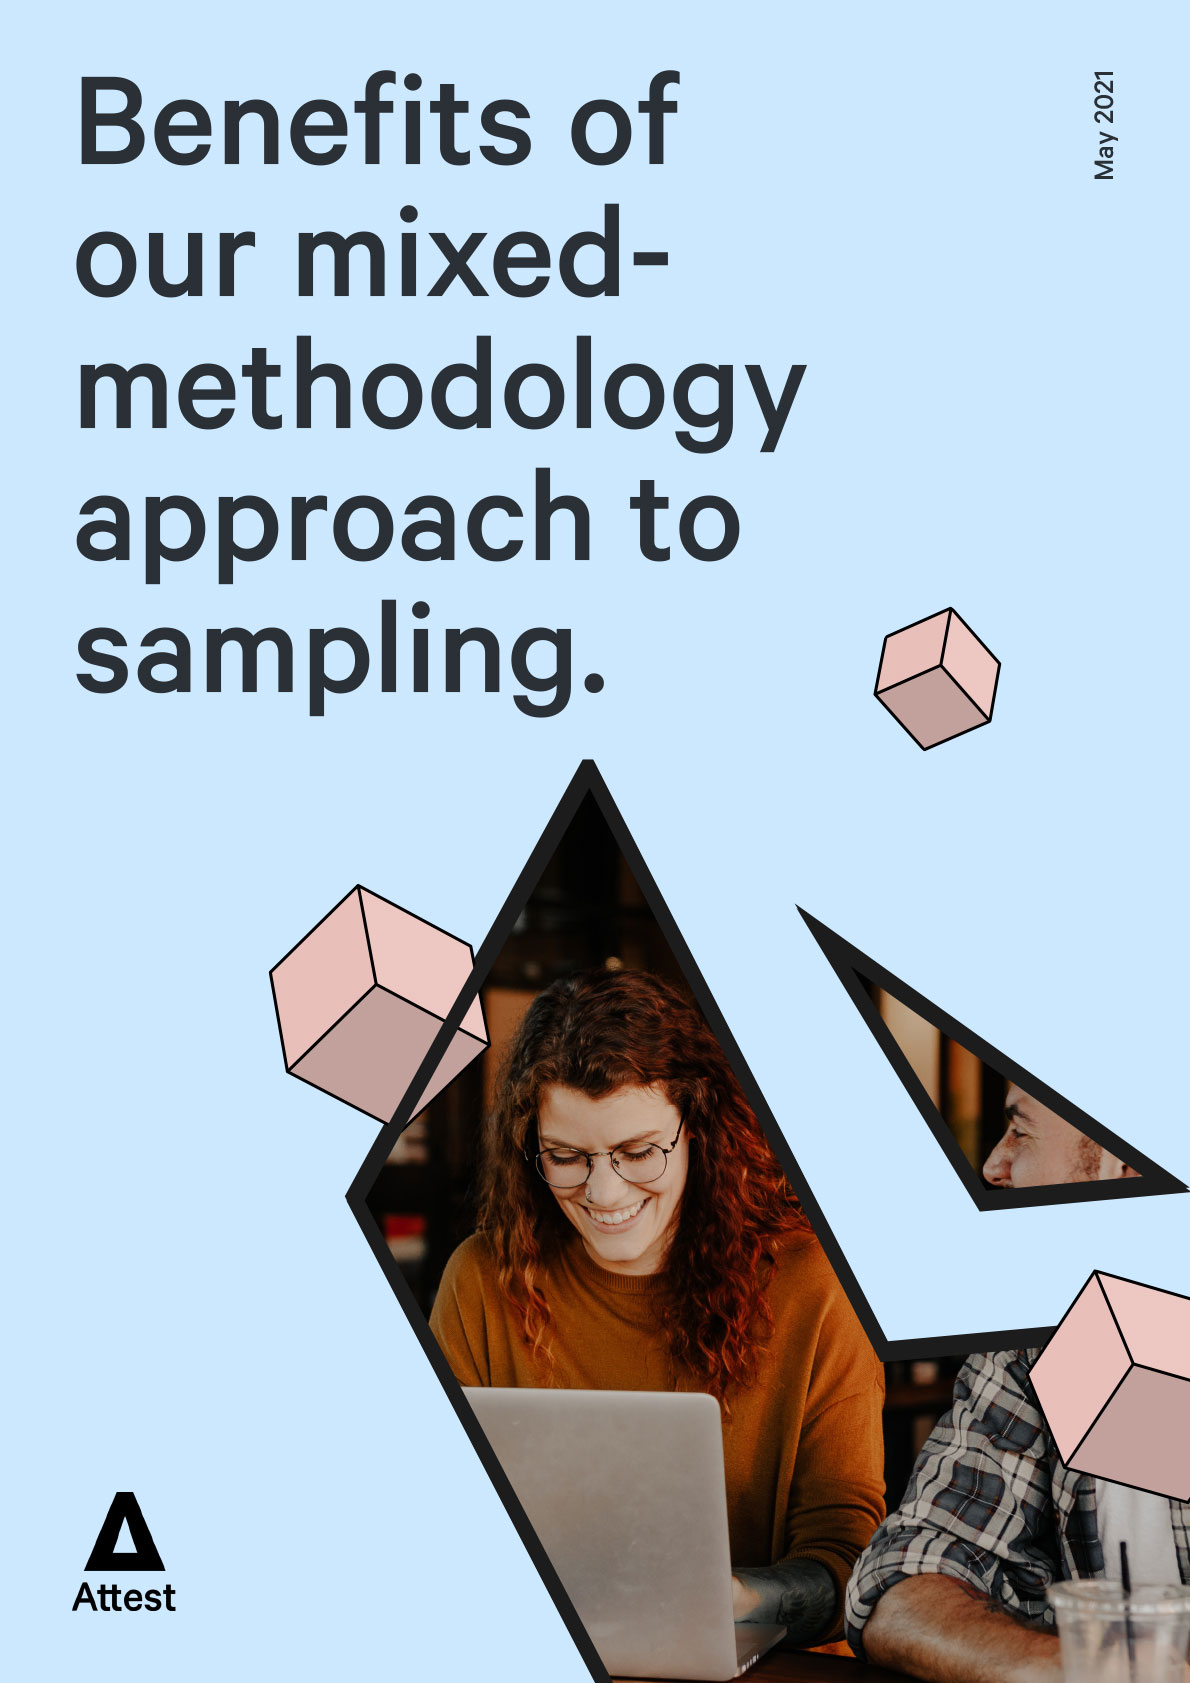 Benefits of our mixed-methodology approach to sampling